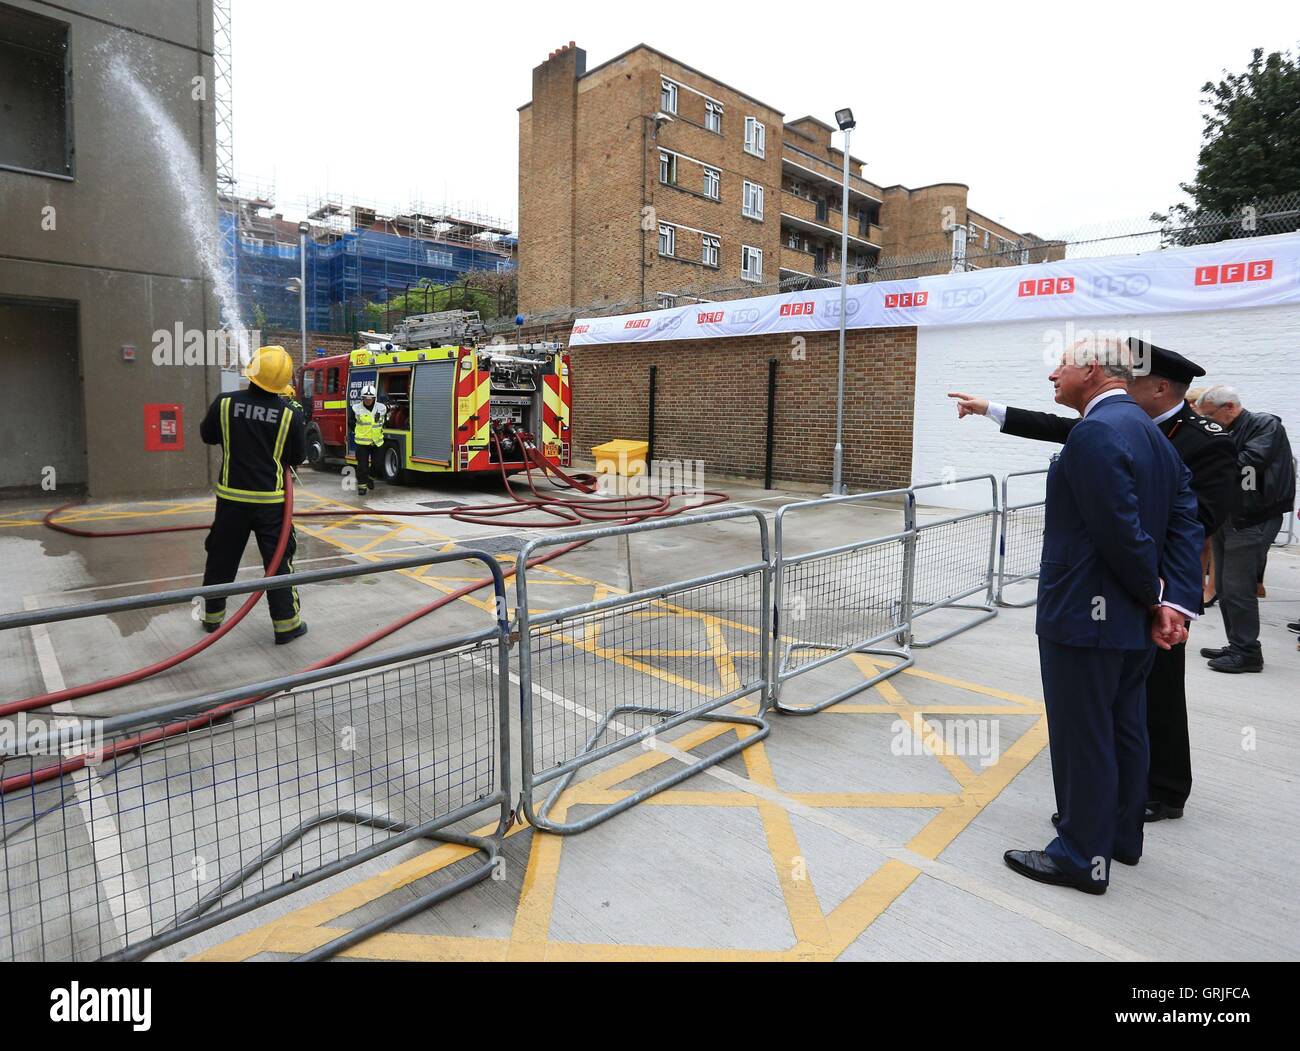 The Prince of Wales watches a fire fighting demonstration during his visit to Shadwell Fire Station where he officially reopened the rebuilt fire station in celebration of the London Fire Brigade's 150th anniversary year. Stock Photo